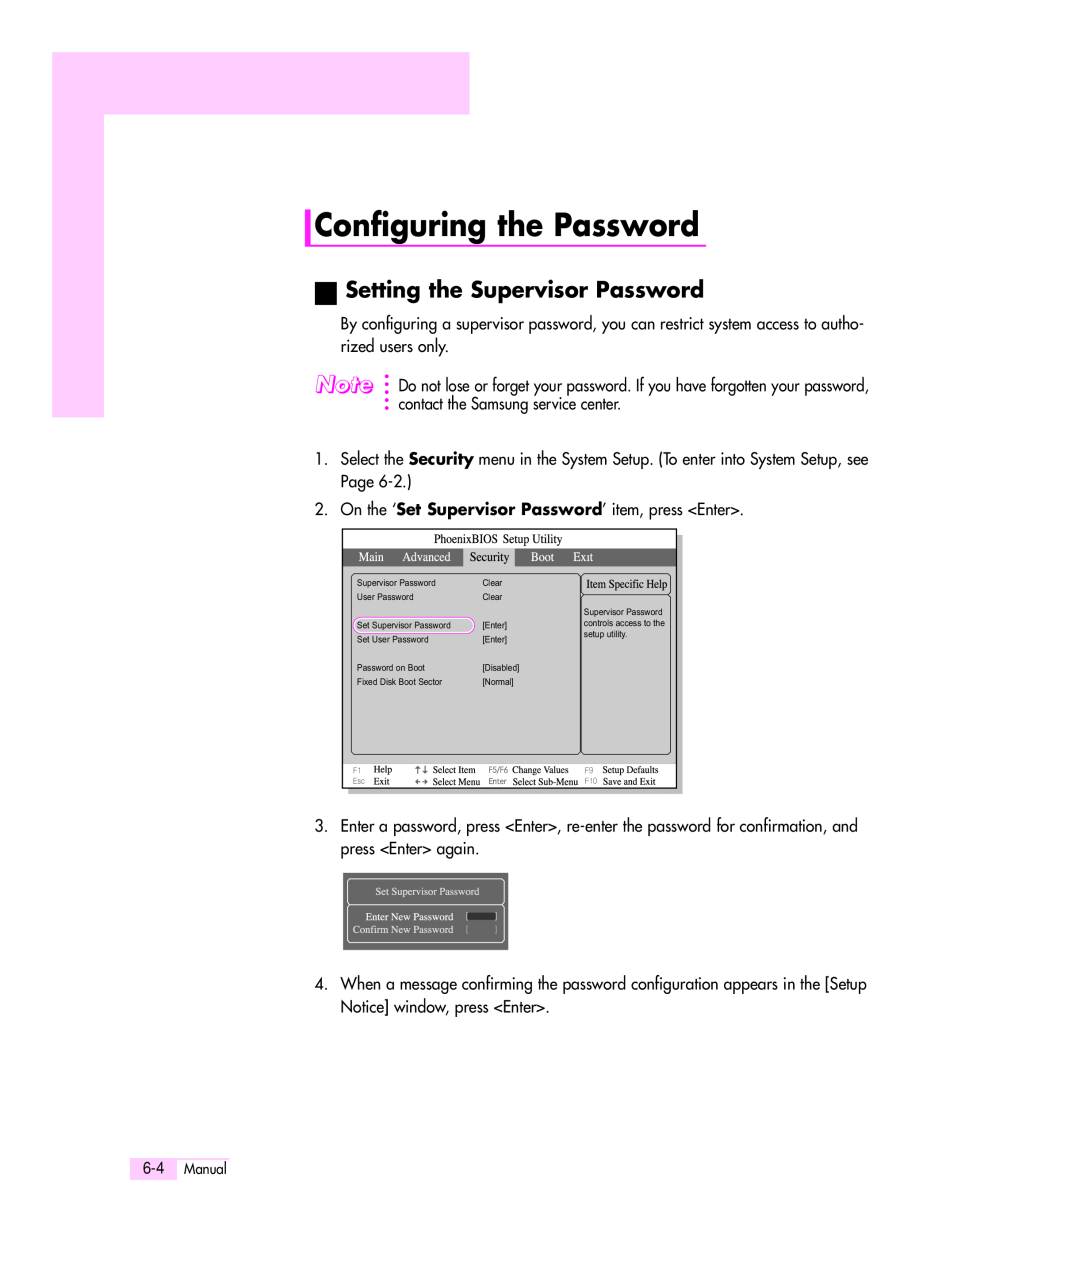 Samsung Q35 manual Configuring the Password, Setting the Supervisor Password 